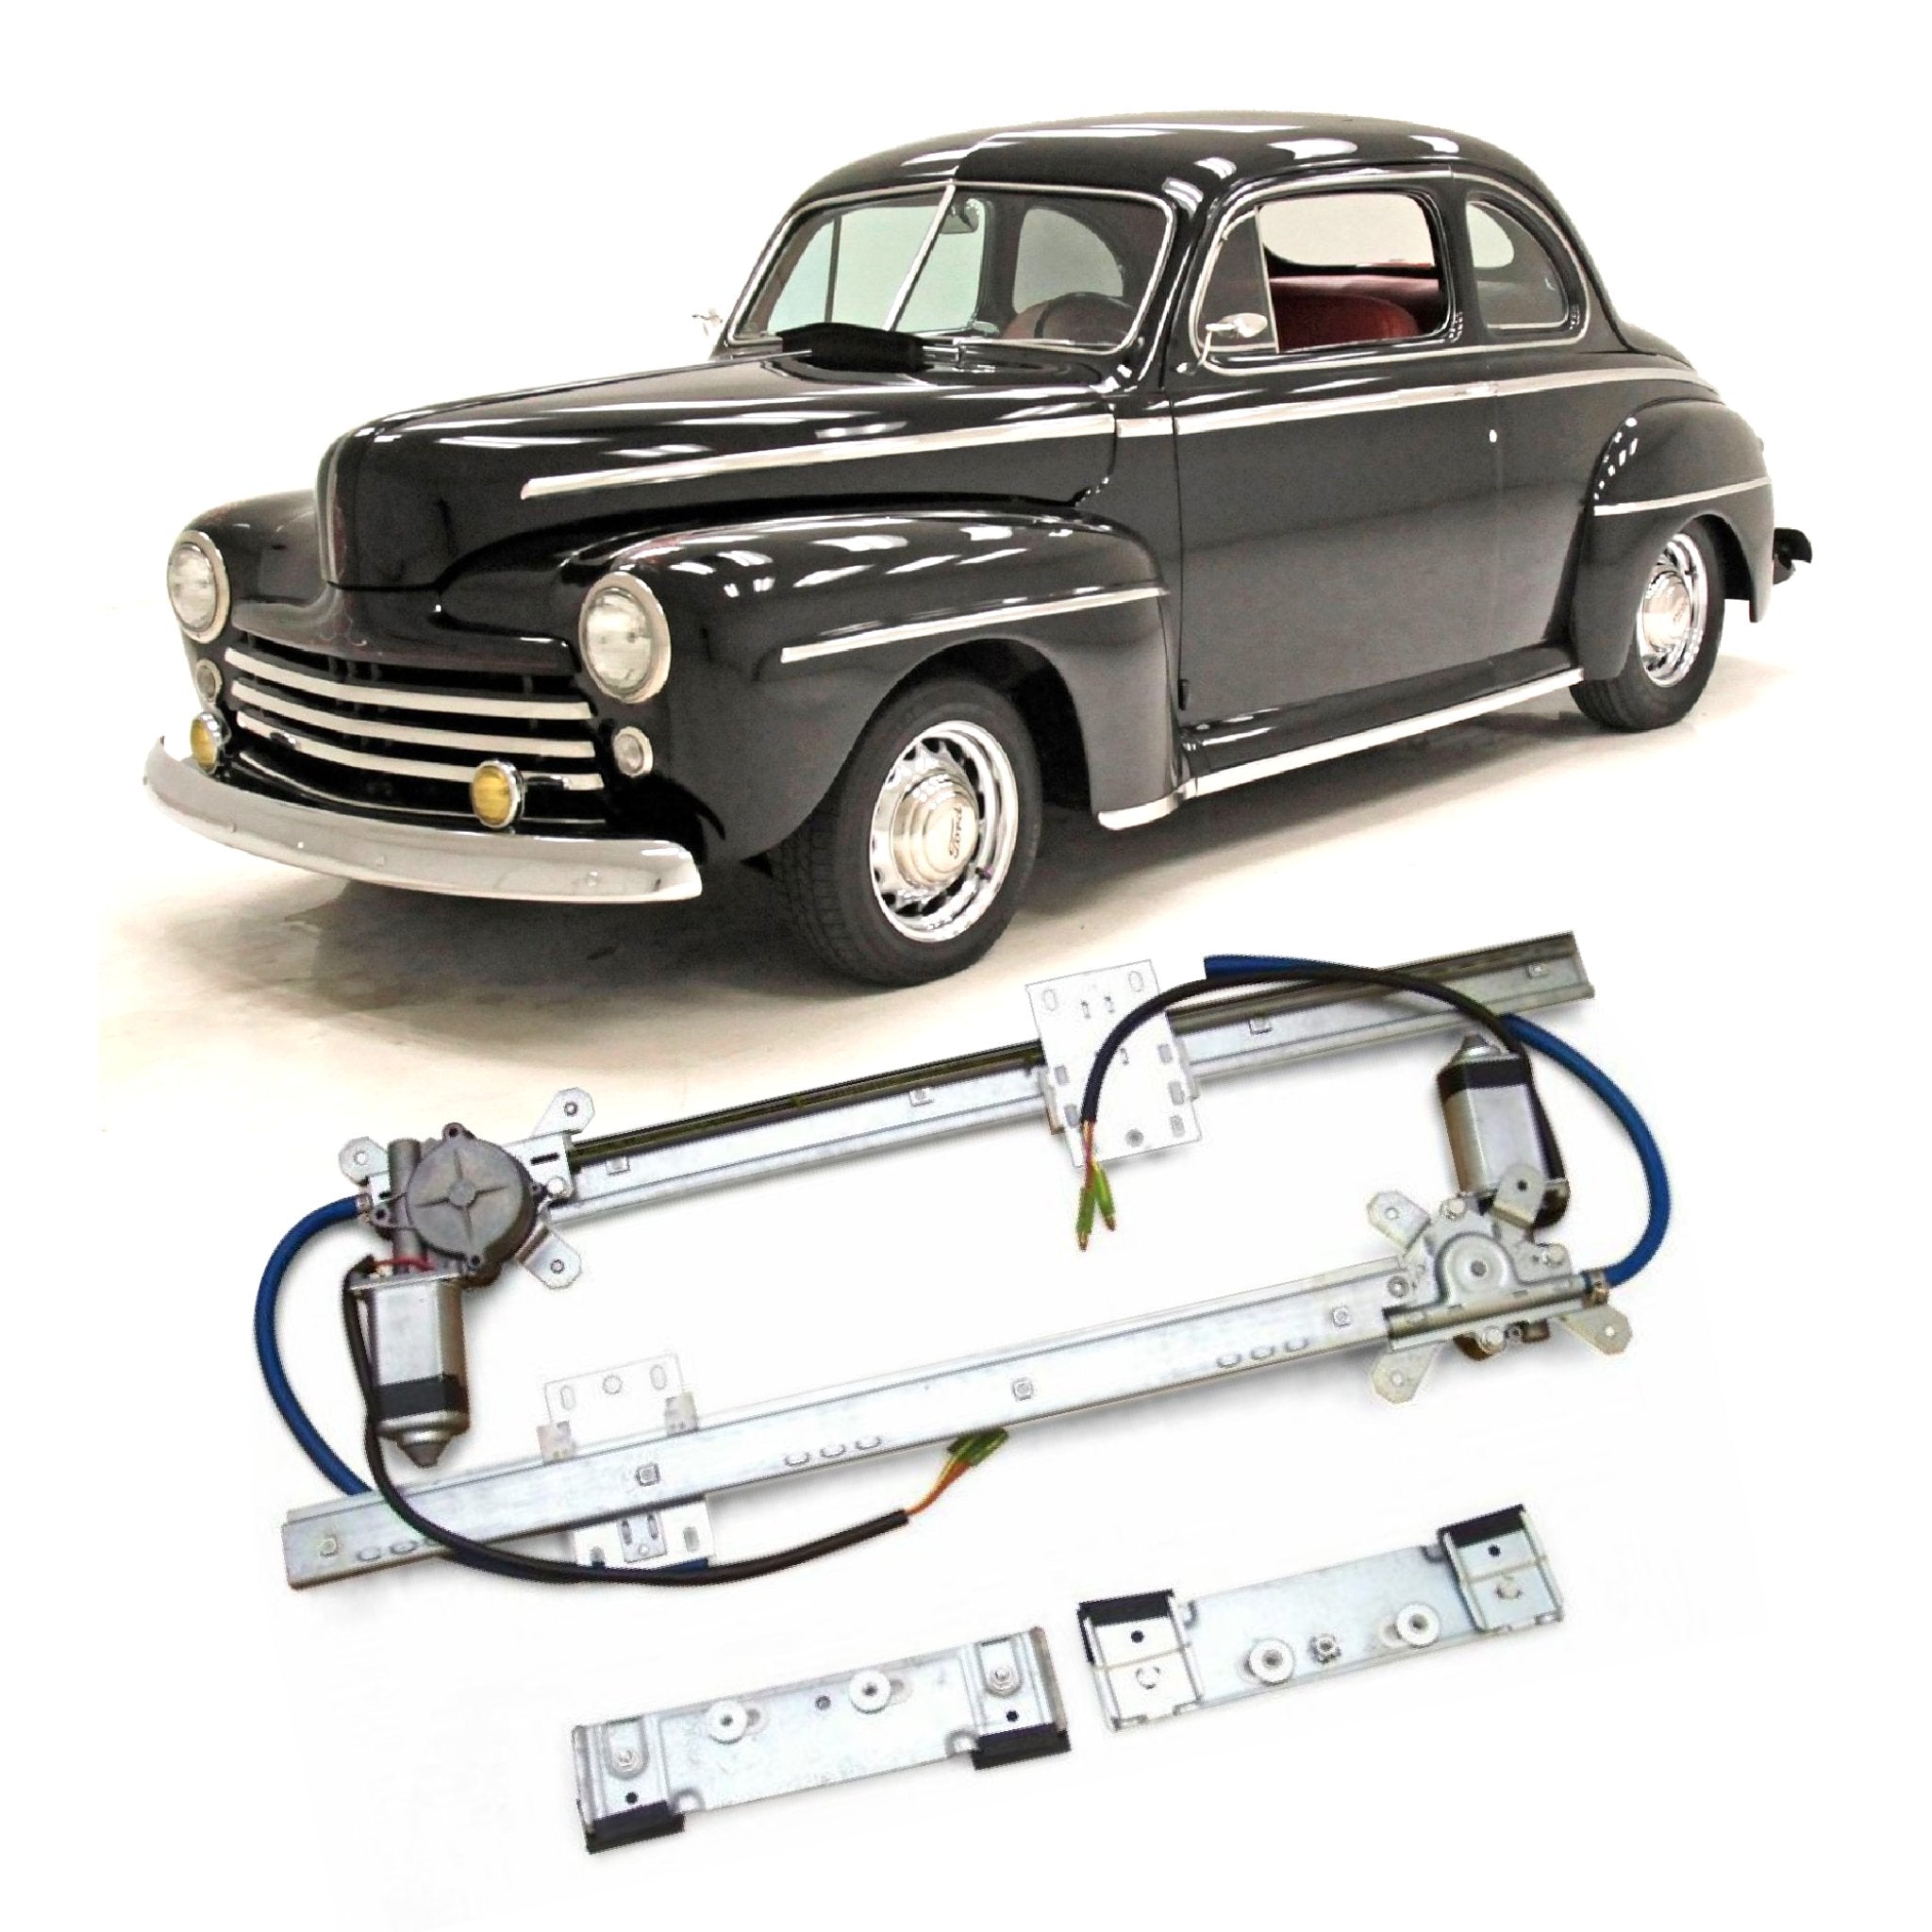 Autoloc 2 Door Power Window Kit for 1947 Ford Coupe Club Standard Deluxe Super